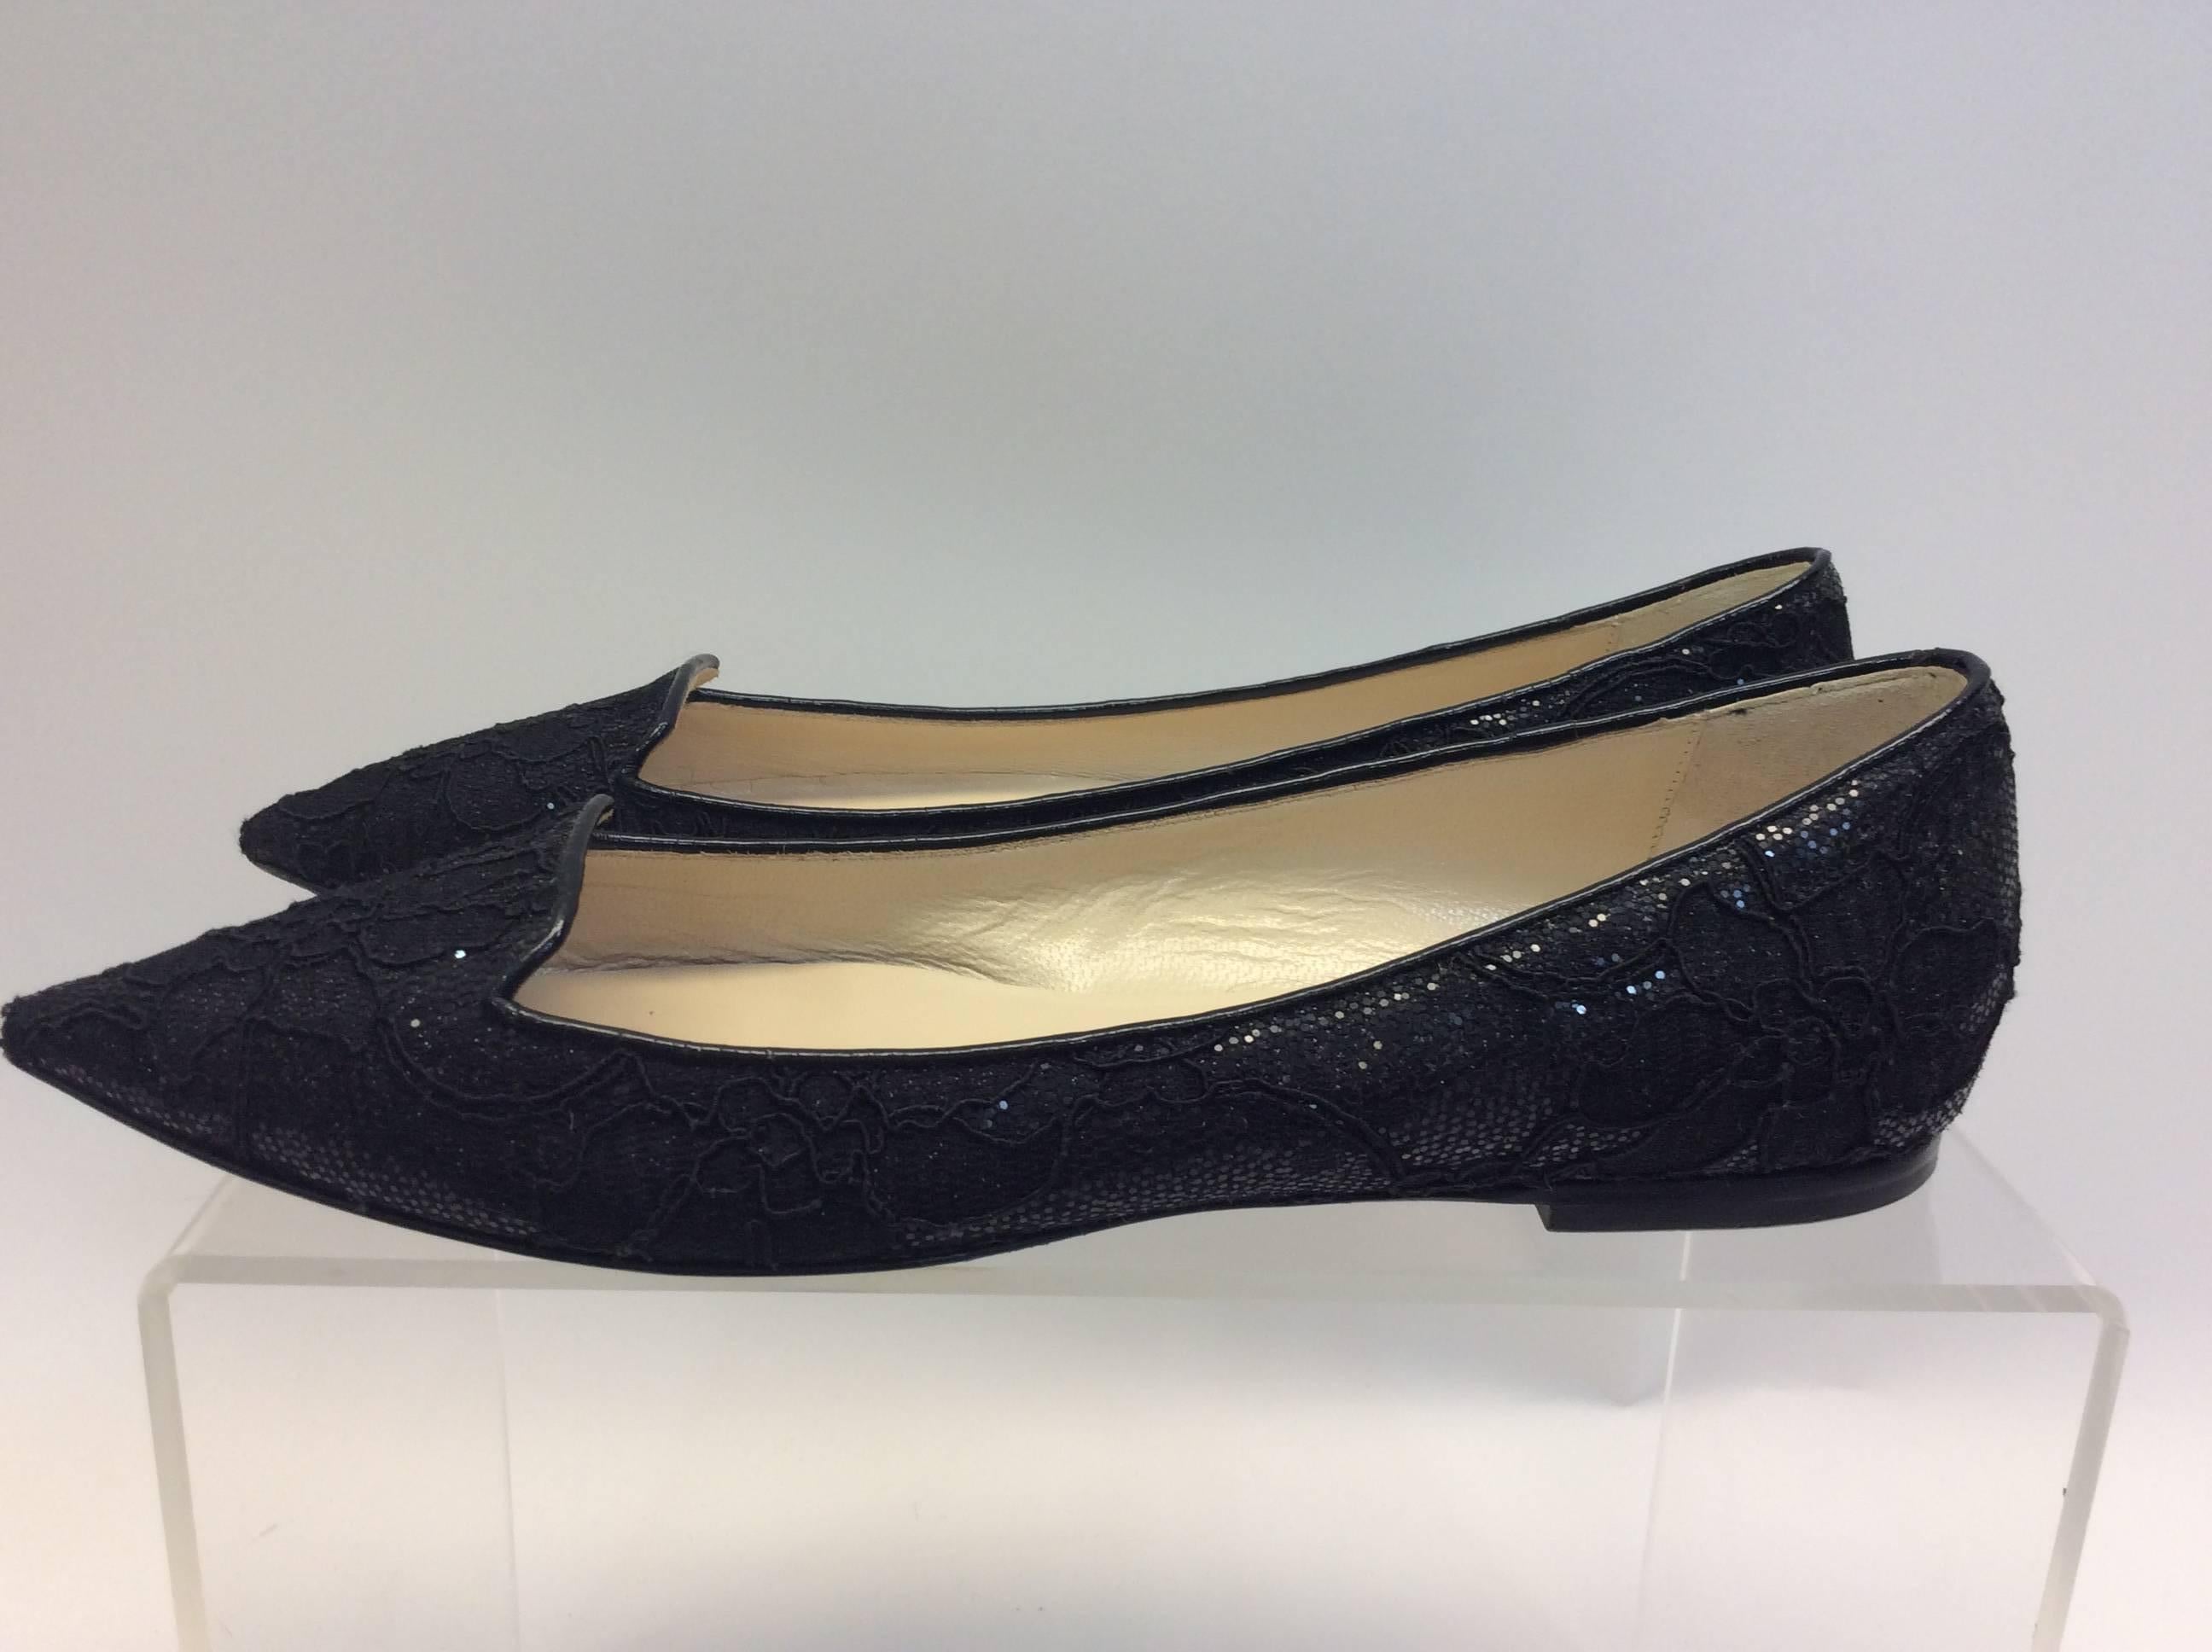 Jimmy Choo Black Lace Flat
$199
Made in Italy
Size 38.5